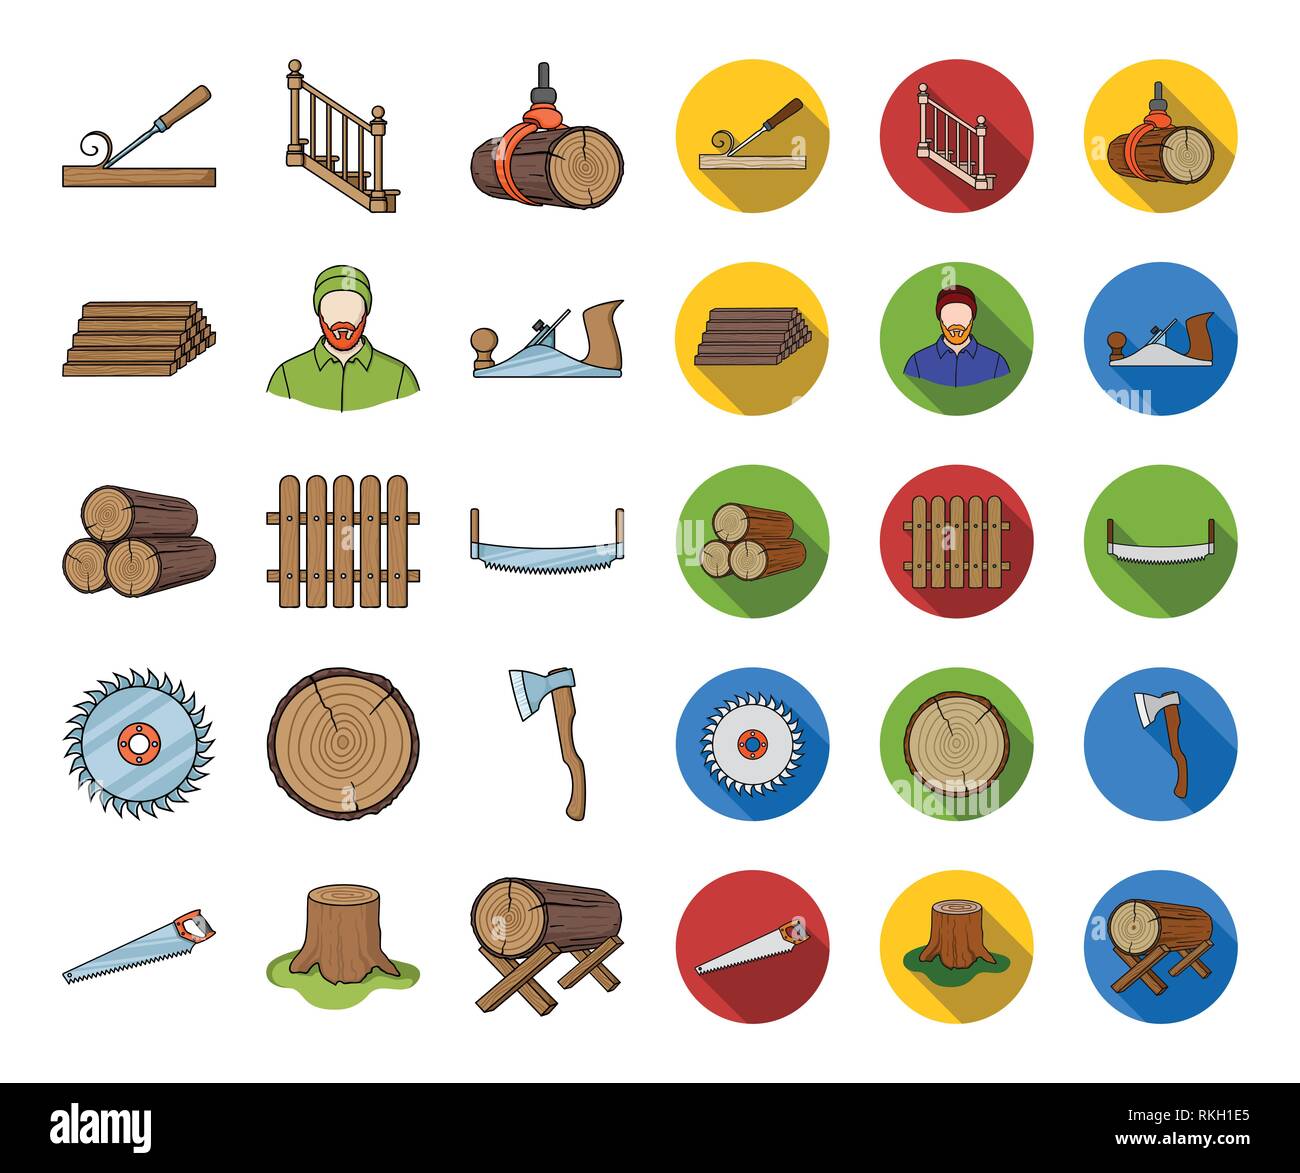 art,axe,cartoon,flat,chisel,collection,crane,cross,design,disc,equipment,falling,fence,goats,hand,hydraulic,icon,illustration,isolated,jack,logo,logs,lumber,lumbers,lumbrejack,plane,processing,product,production,saw,sawing,sawmill,section,set,sign,stack,stairs,stump,symbol,timber,tools,tree,two-man,vector,web Vector Vectors , Stock Vector